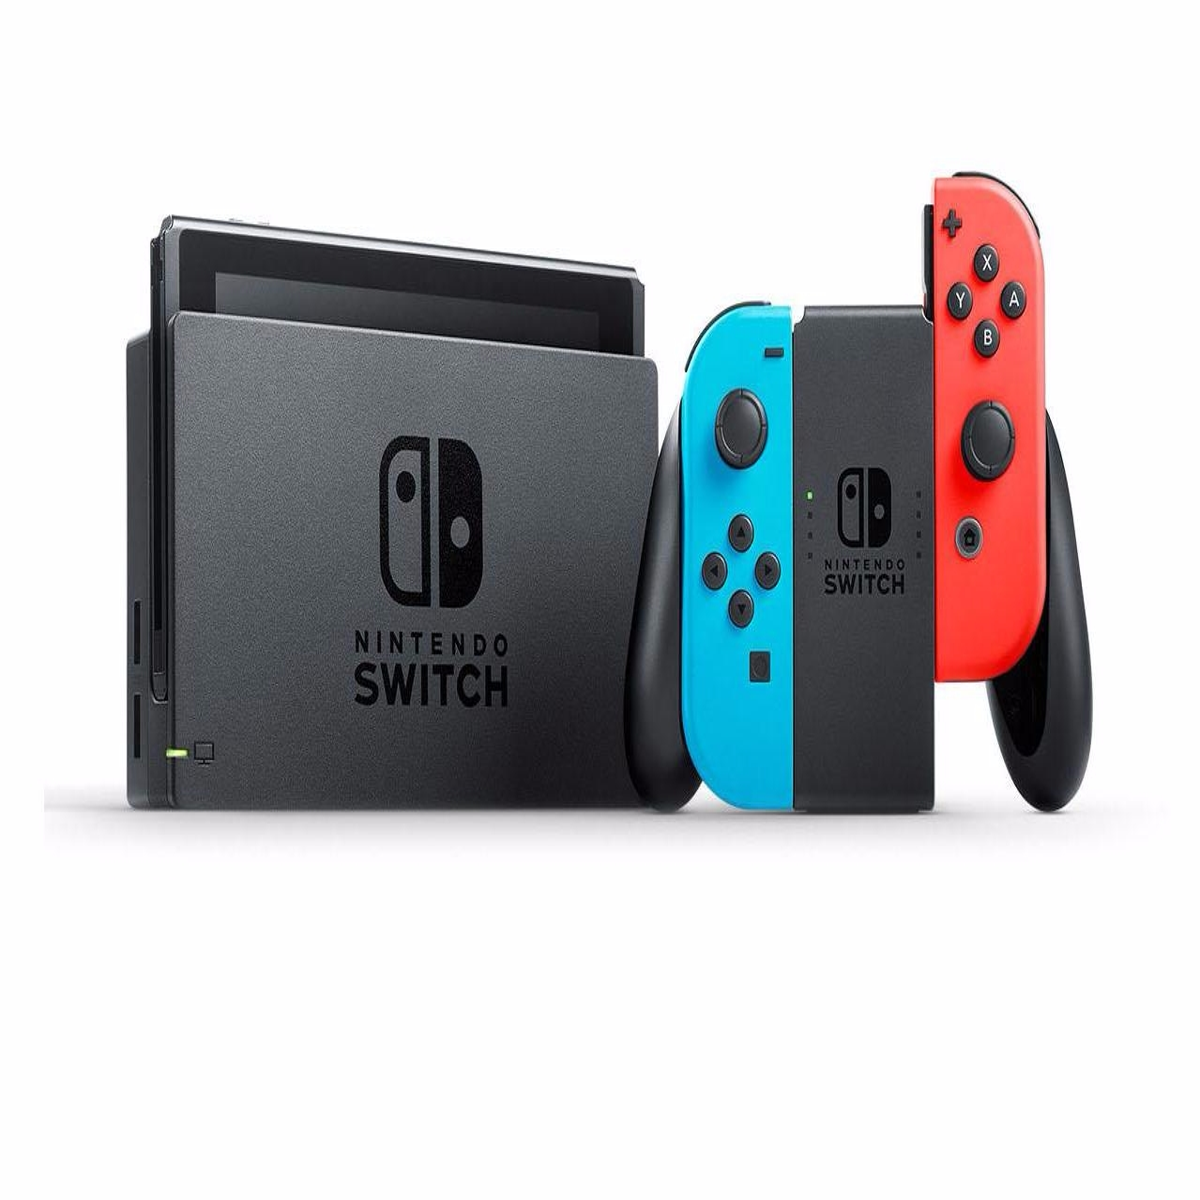 Switch vs. 3DS: Which Nintendo Console Is For You?